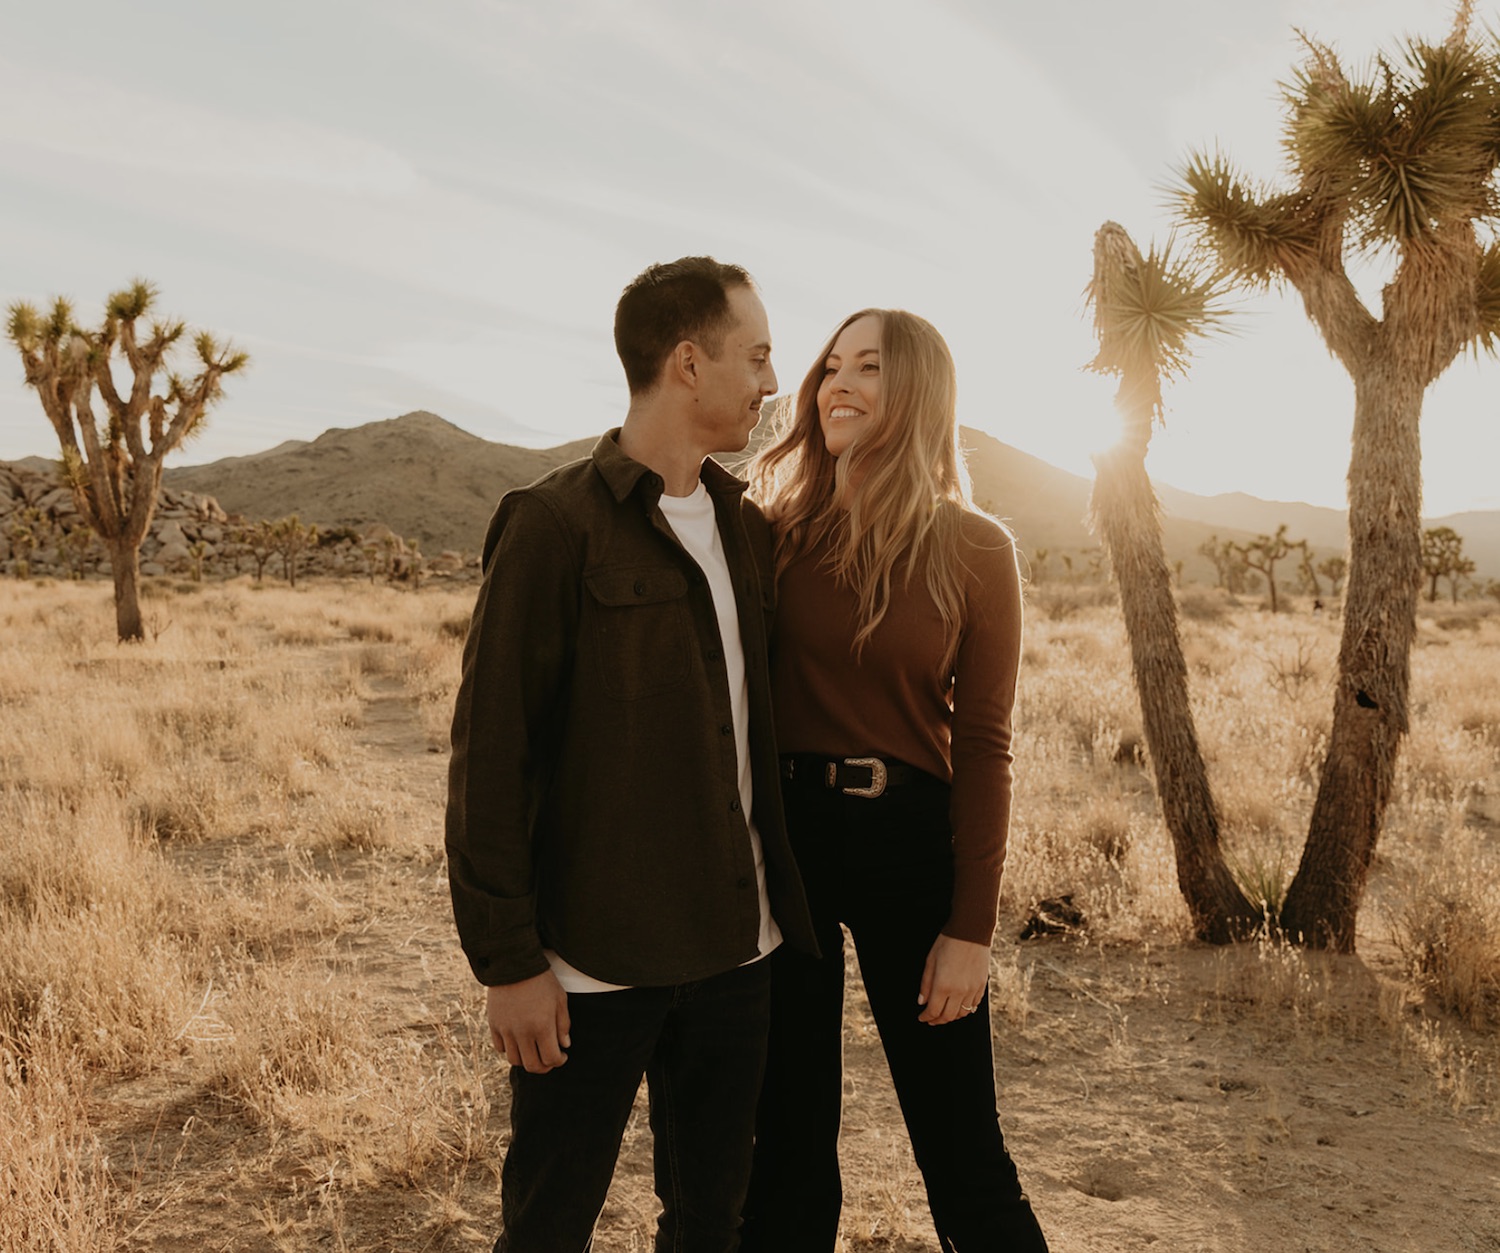 A couple smiles at each other during their golden hour engagement photo shoot in Southern California photographed by Maya Lora Photo.